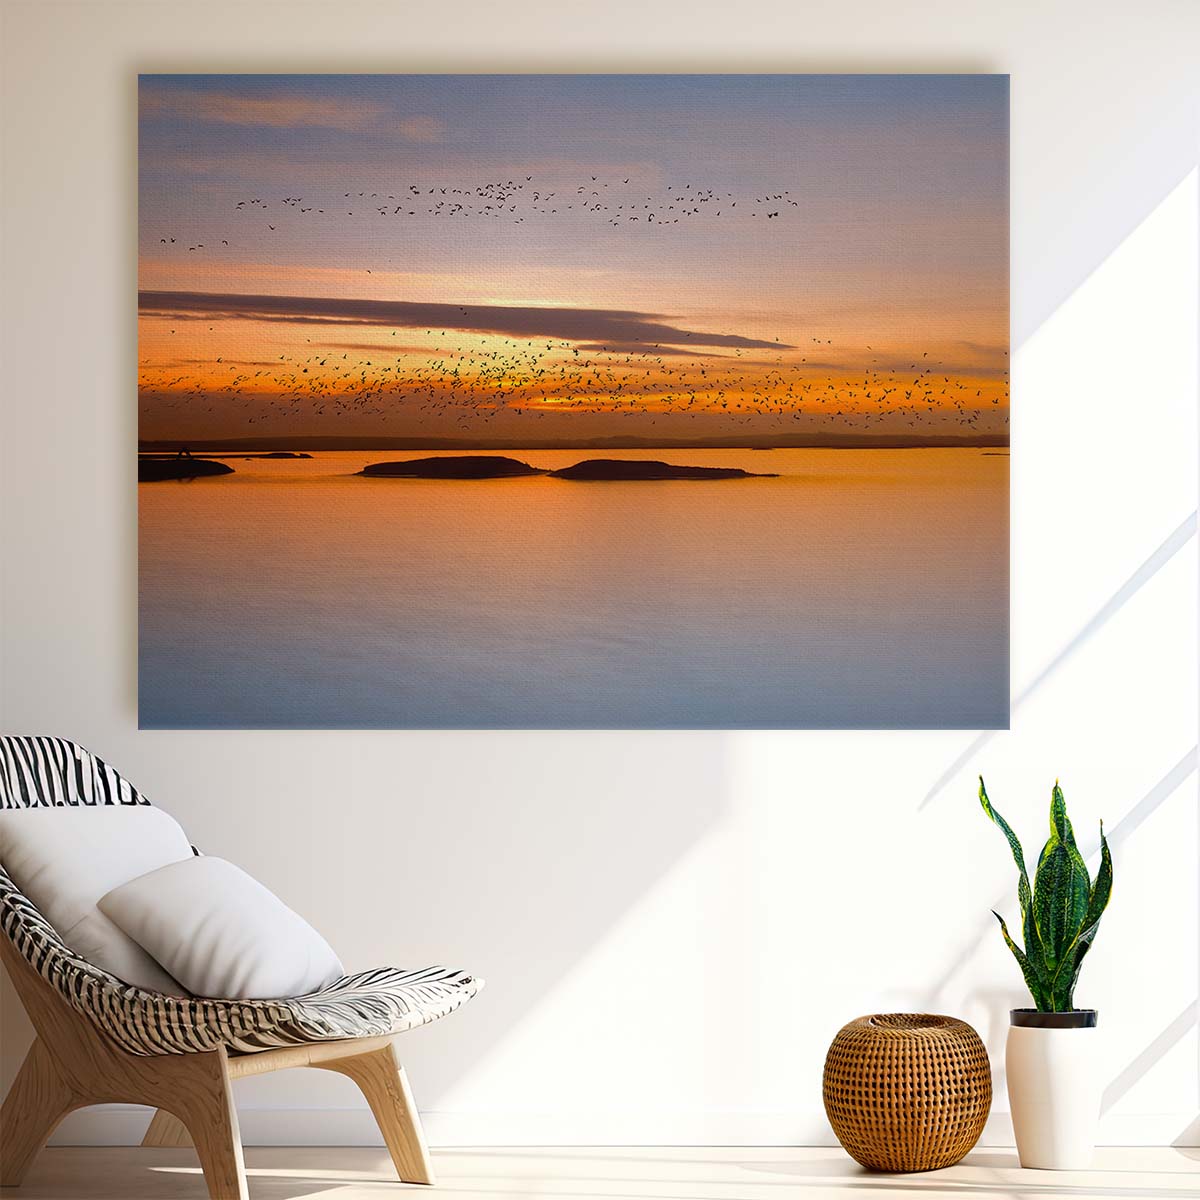 Twilight Birds Migration Over Mietkow Lake Wall Art by Luxuriance Designs. Made in USA.